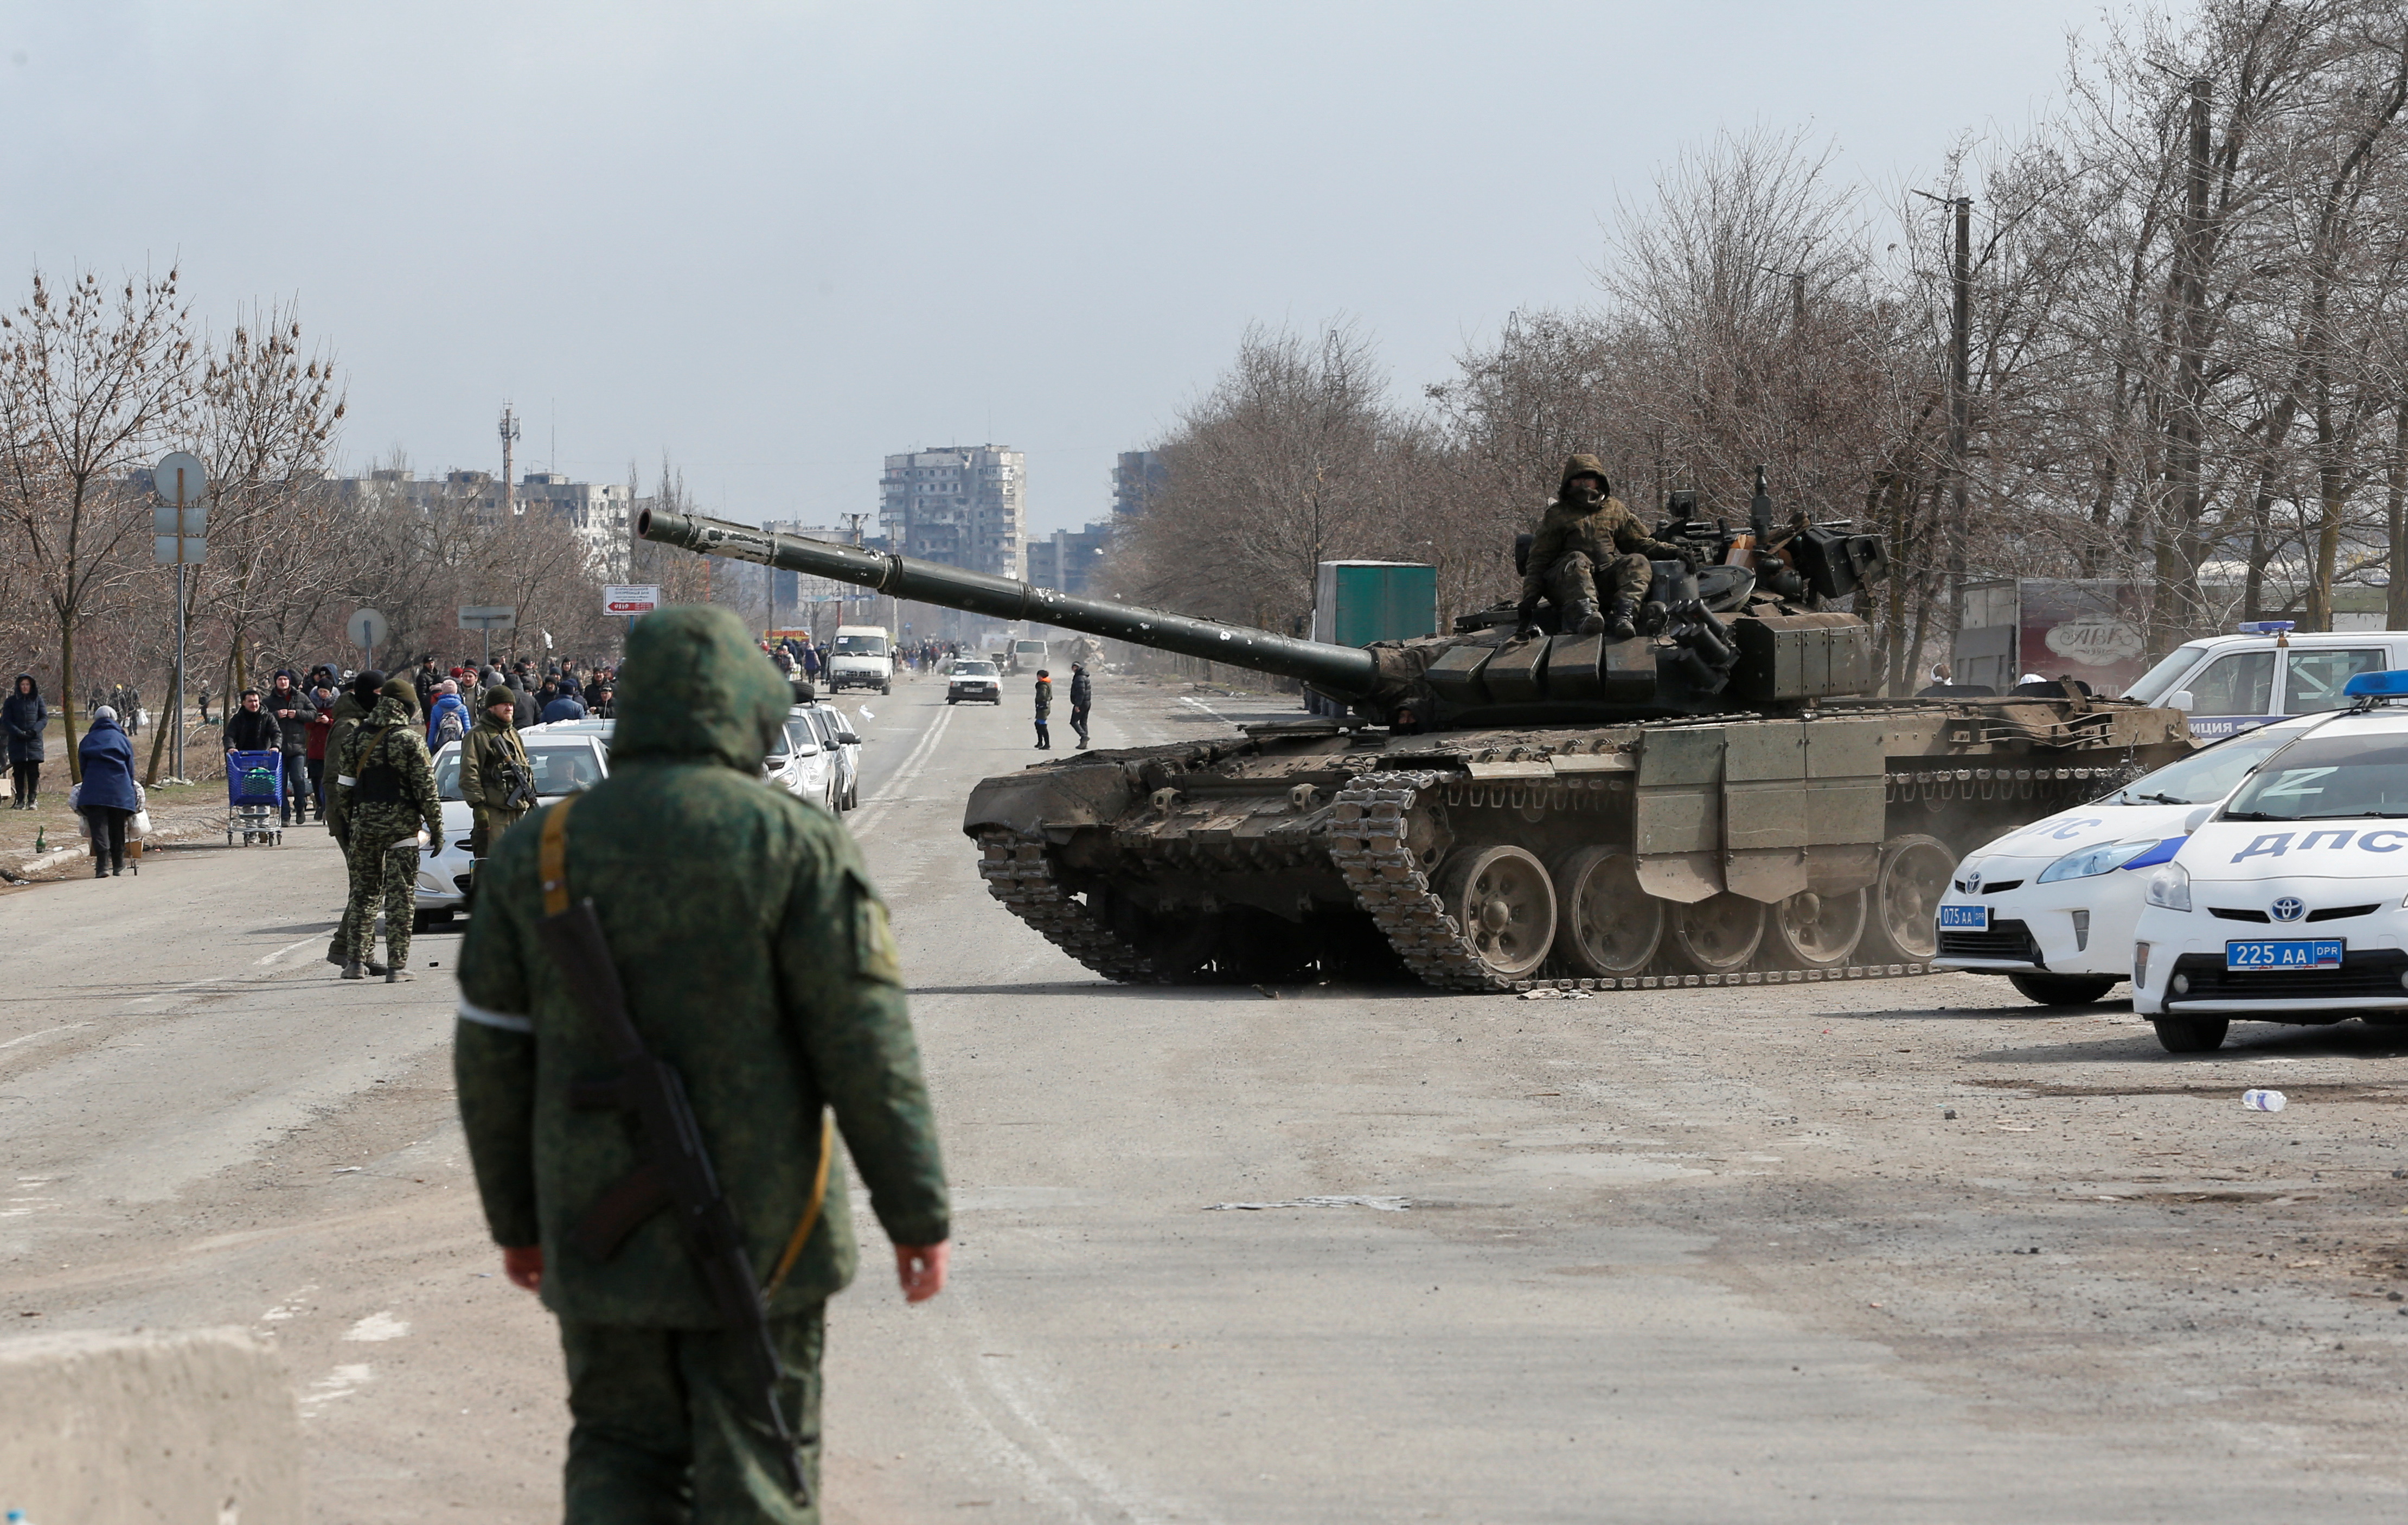 Service members of pro-Russian troops are seen in the besieged city of Mariupol